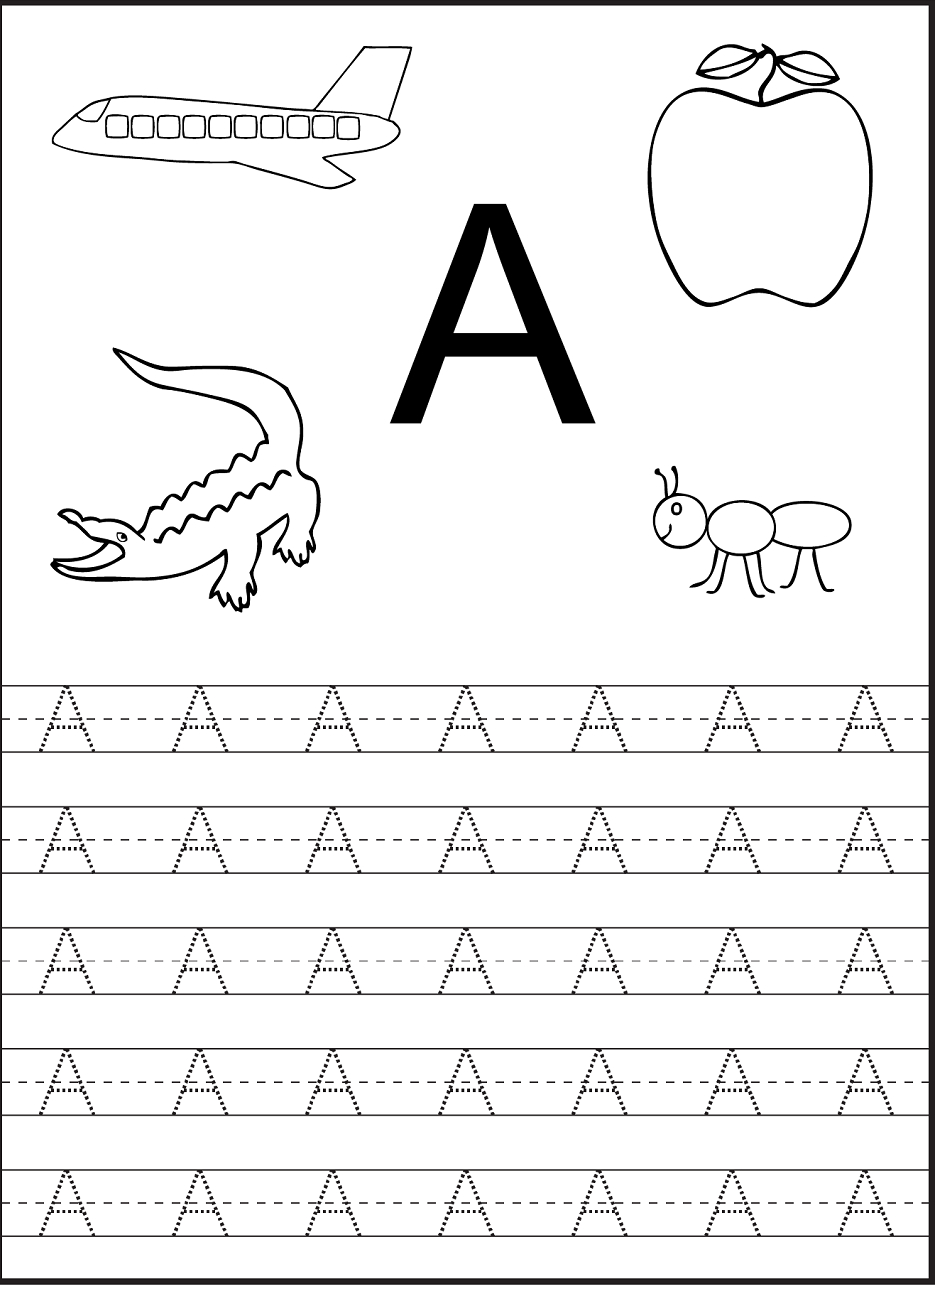 Tracing The Letter A Free Printable | Druckvorlage inside Free Printable Tracing Letters For Preschoolers